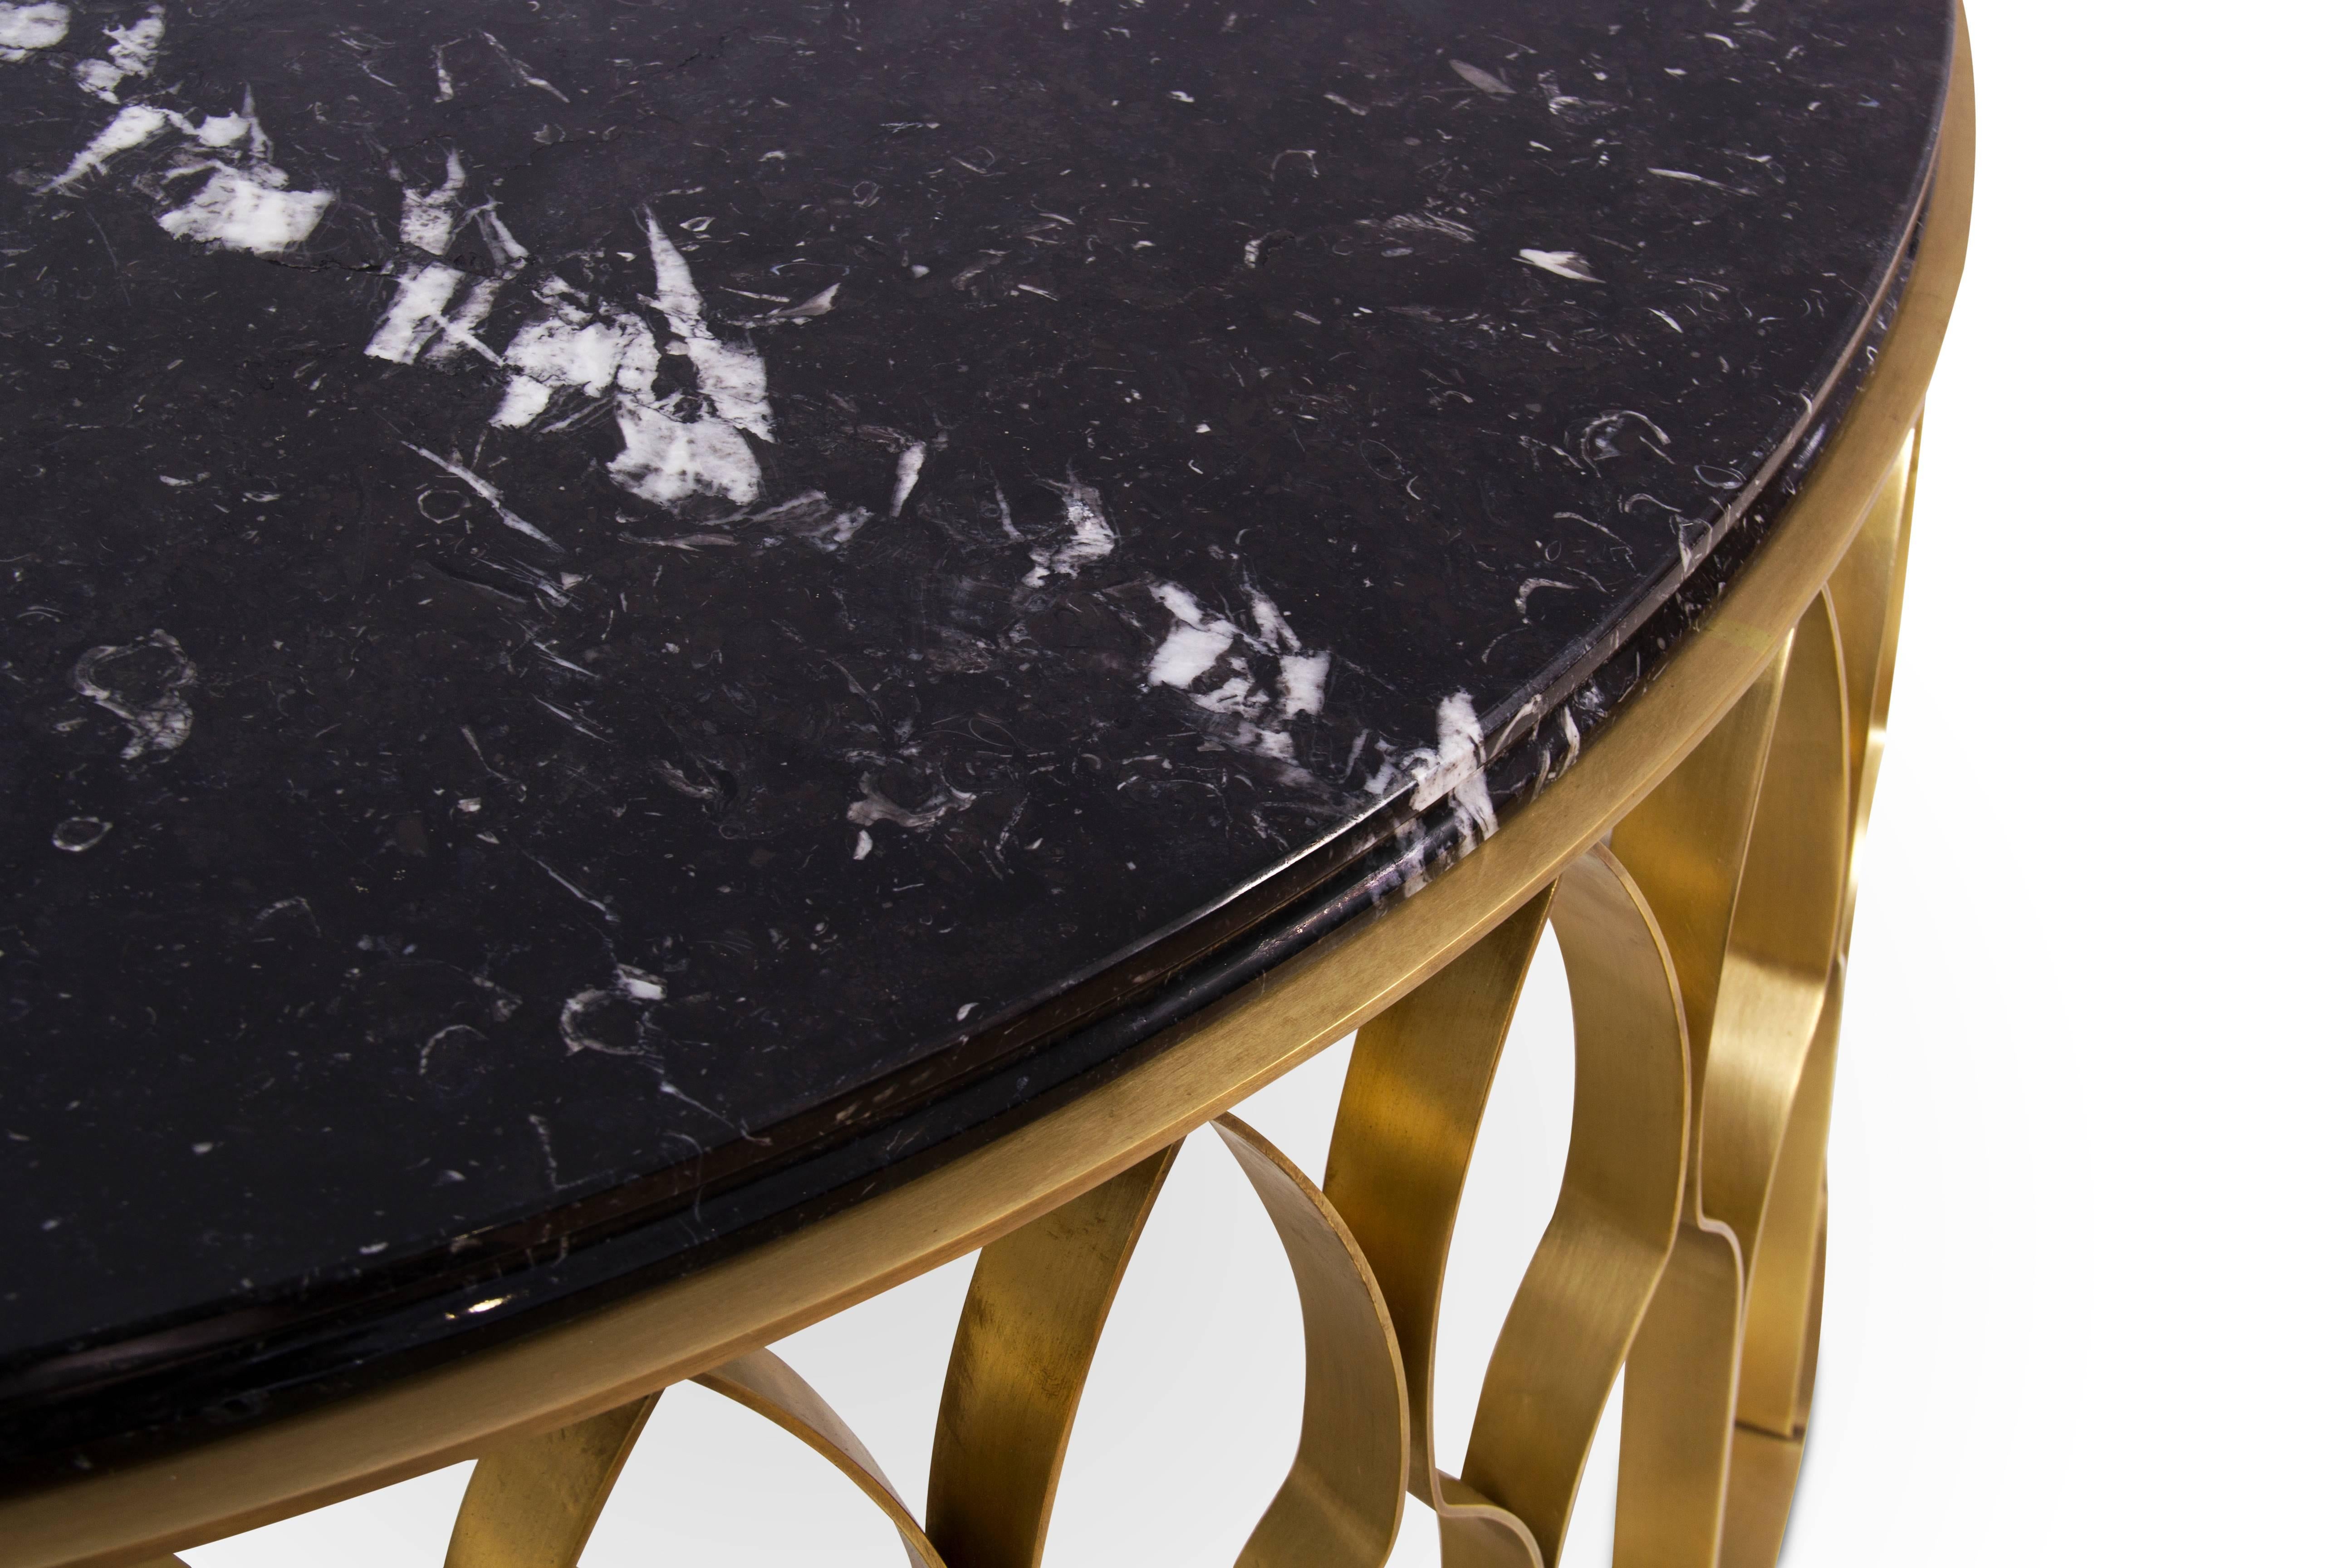 The world's finest mosques are the influences for this aptly named coffee table. The marble and brass design is the perfect hybrid of strength and delicacy – much like its inspiration.
Its architectural element is most obviously depicted in its